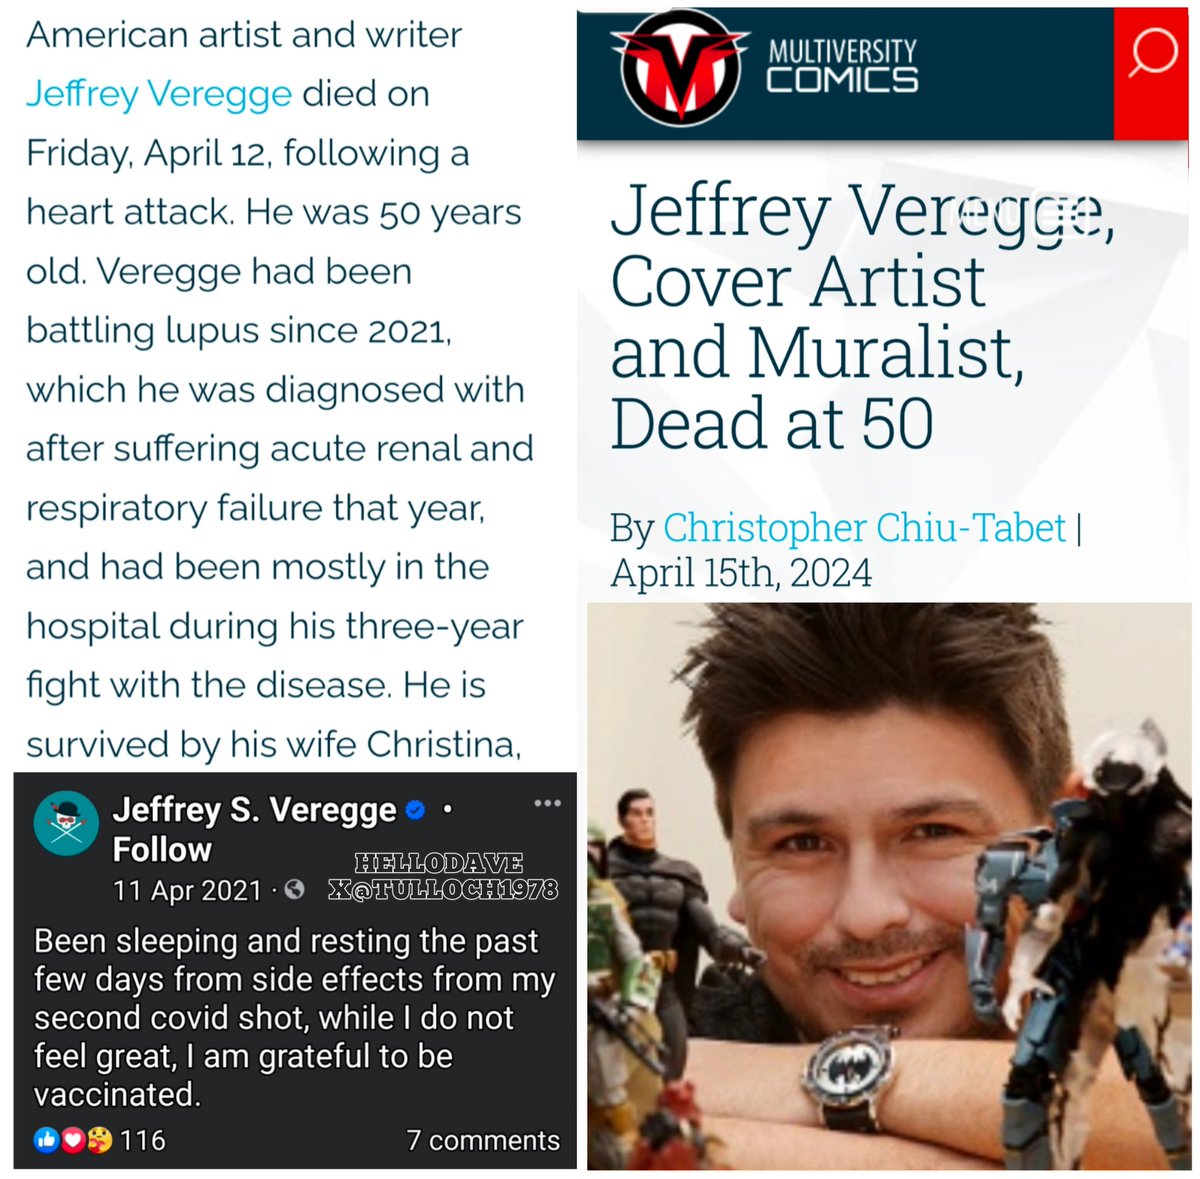 Jeffrey Veregge, Cover Artist For Marvel Comics, Dead at 50 following a Heart Attack. 'Been sleeping and resting the past few days from side effects from my second covid shot, while I do not feel great, I am grateful to be vaccinated.' #DiedSuddenly multiversitycomics.com/news/jeffrey-v…